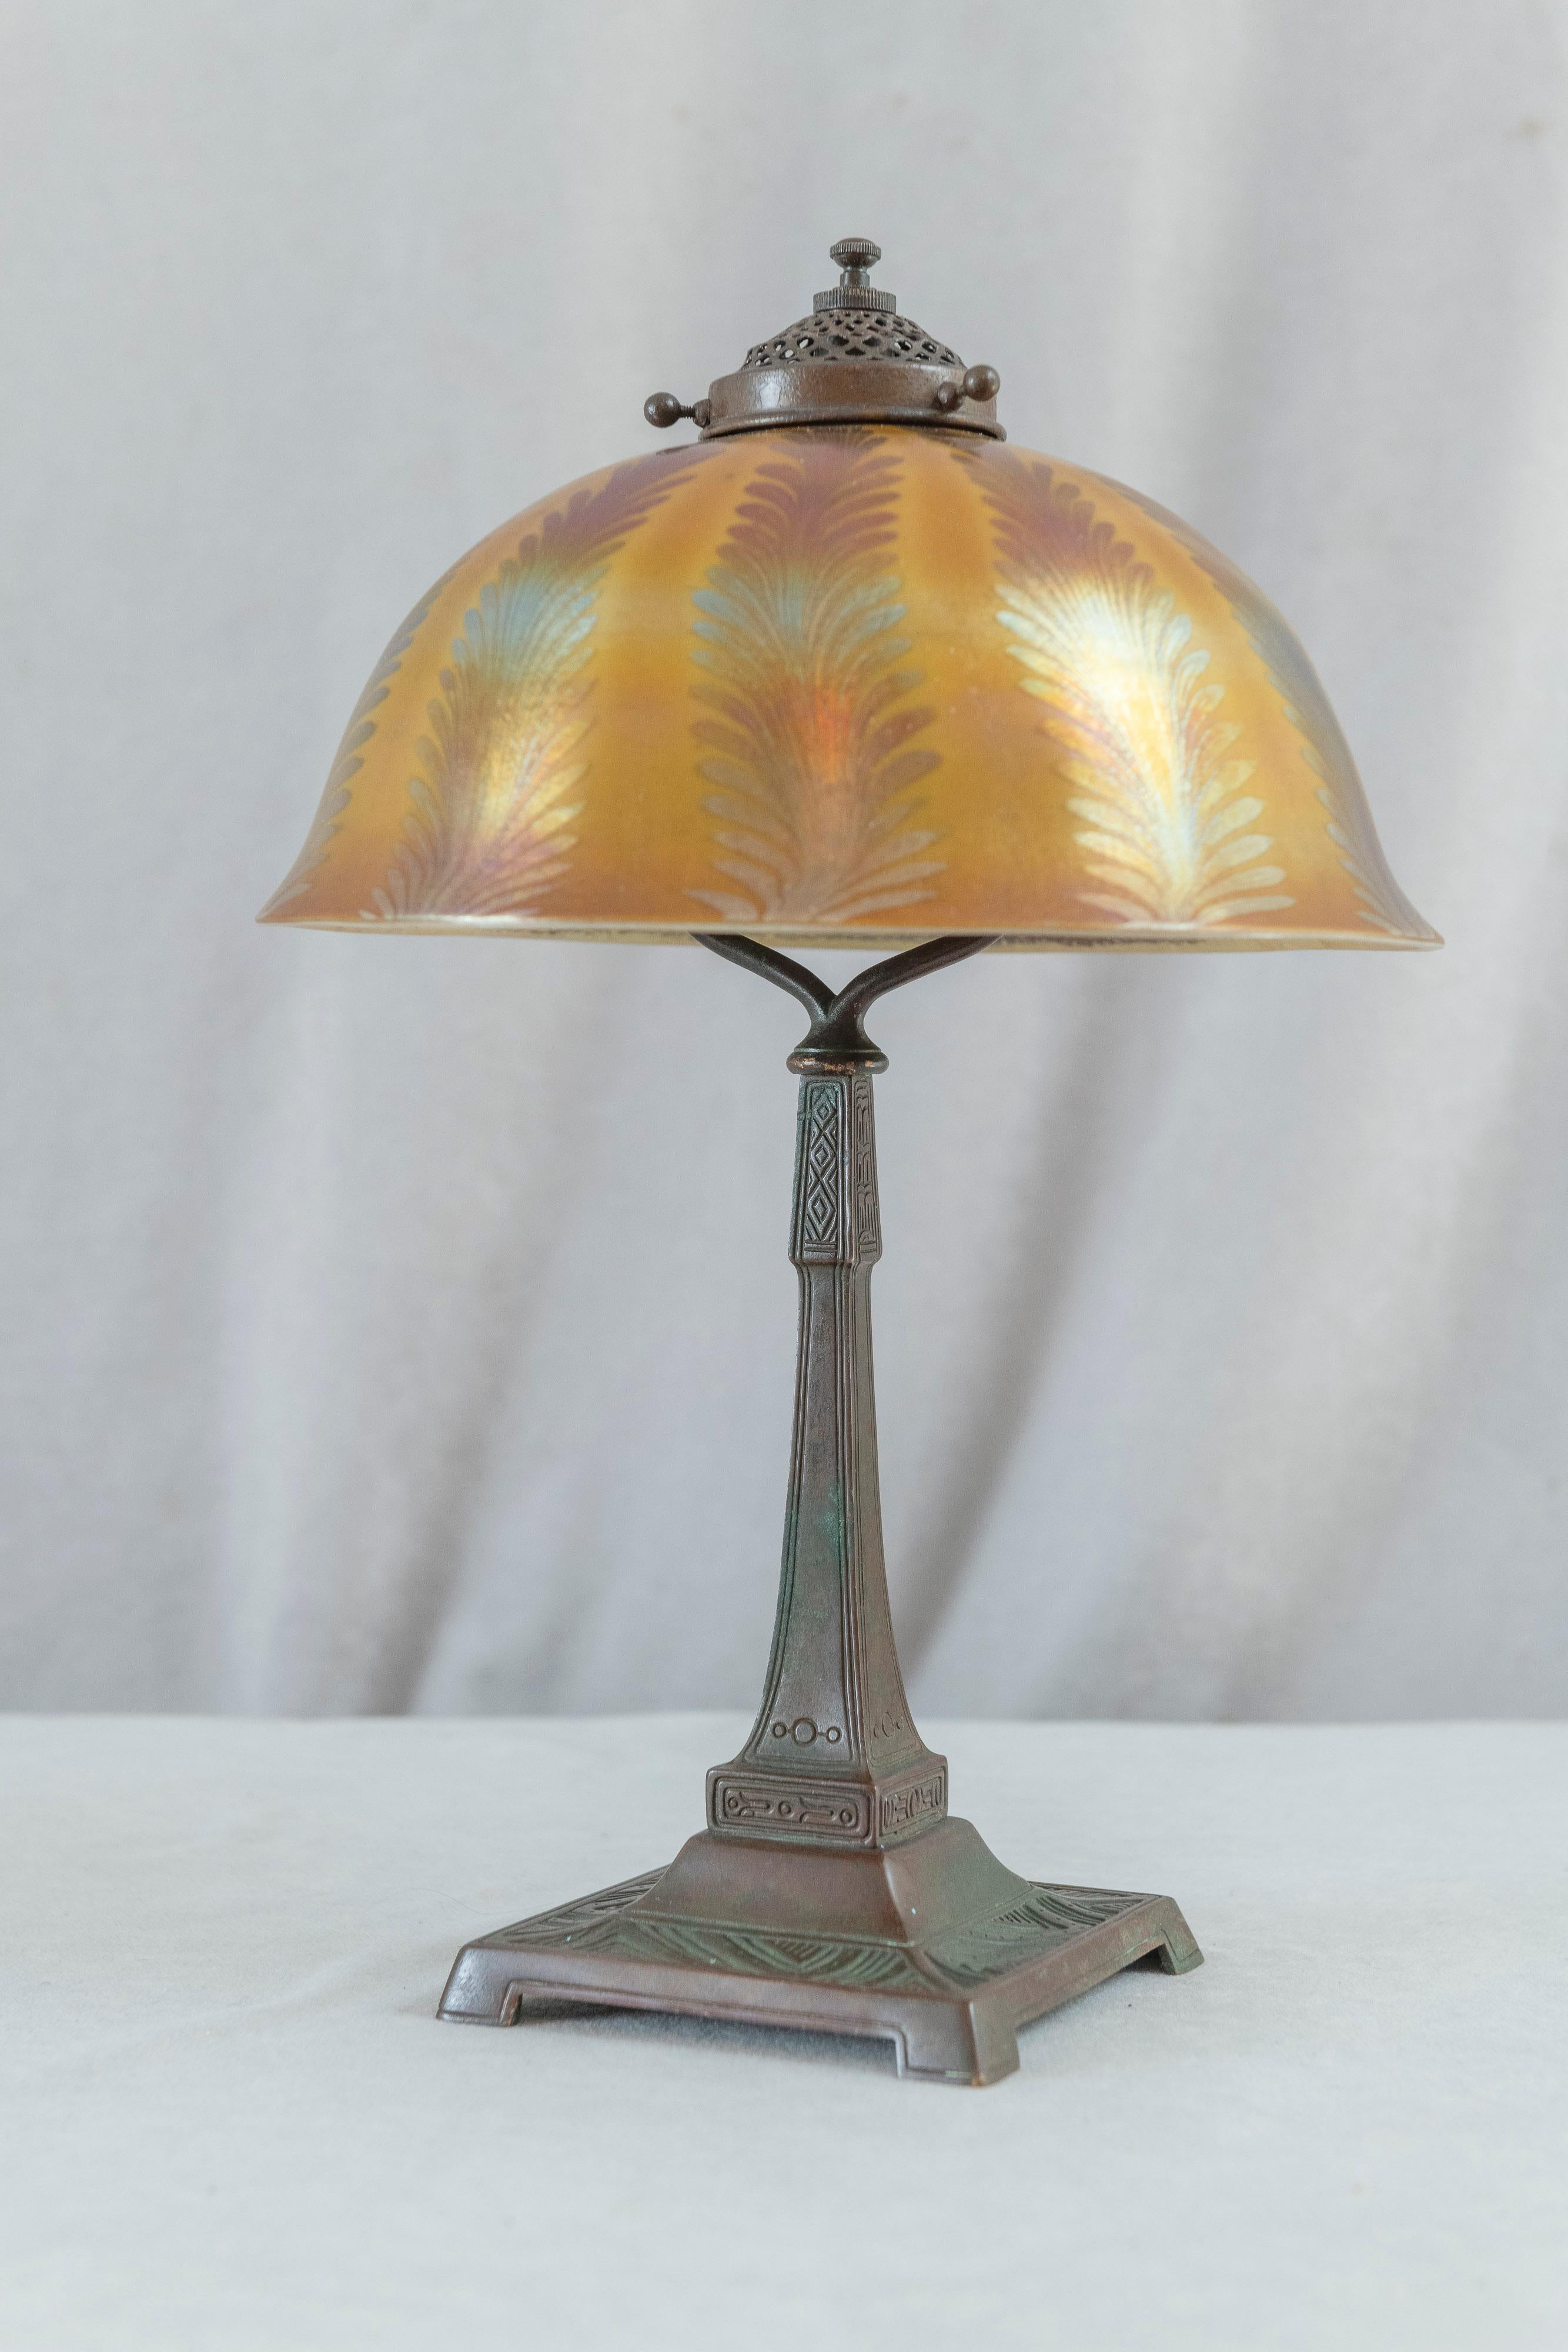 Tiffany Studios Table Lamp w/Hand Blown Art Glass Shade, All Signed, ca. 1905 6